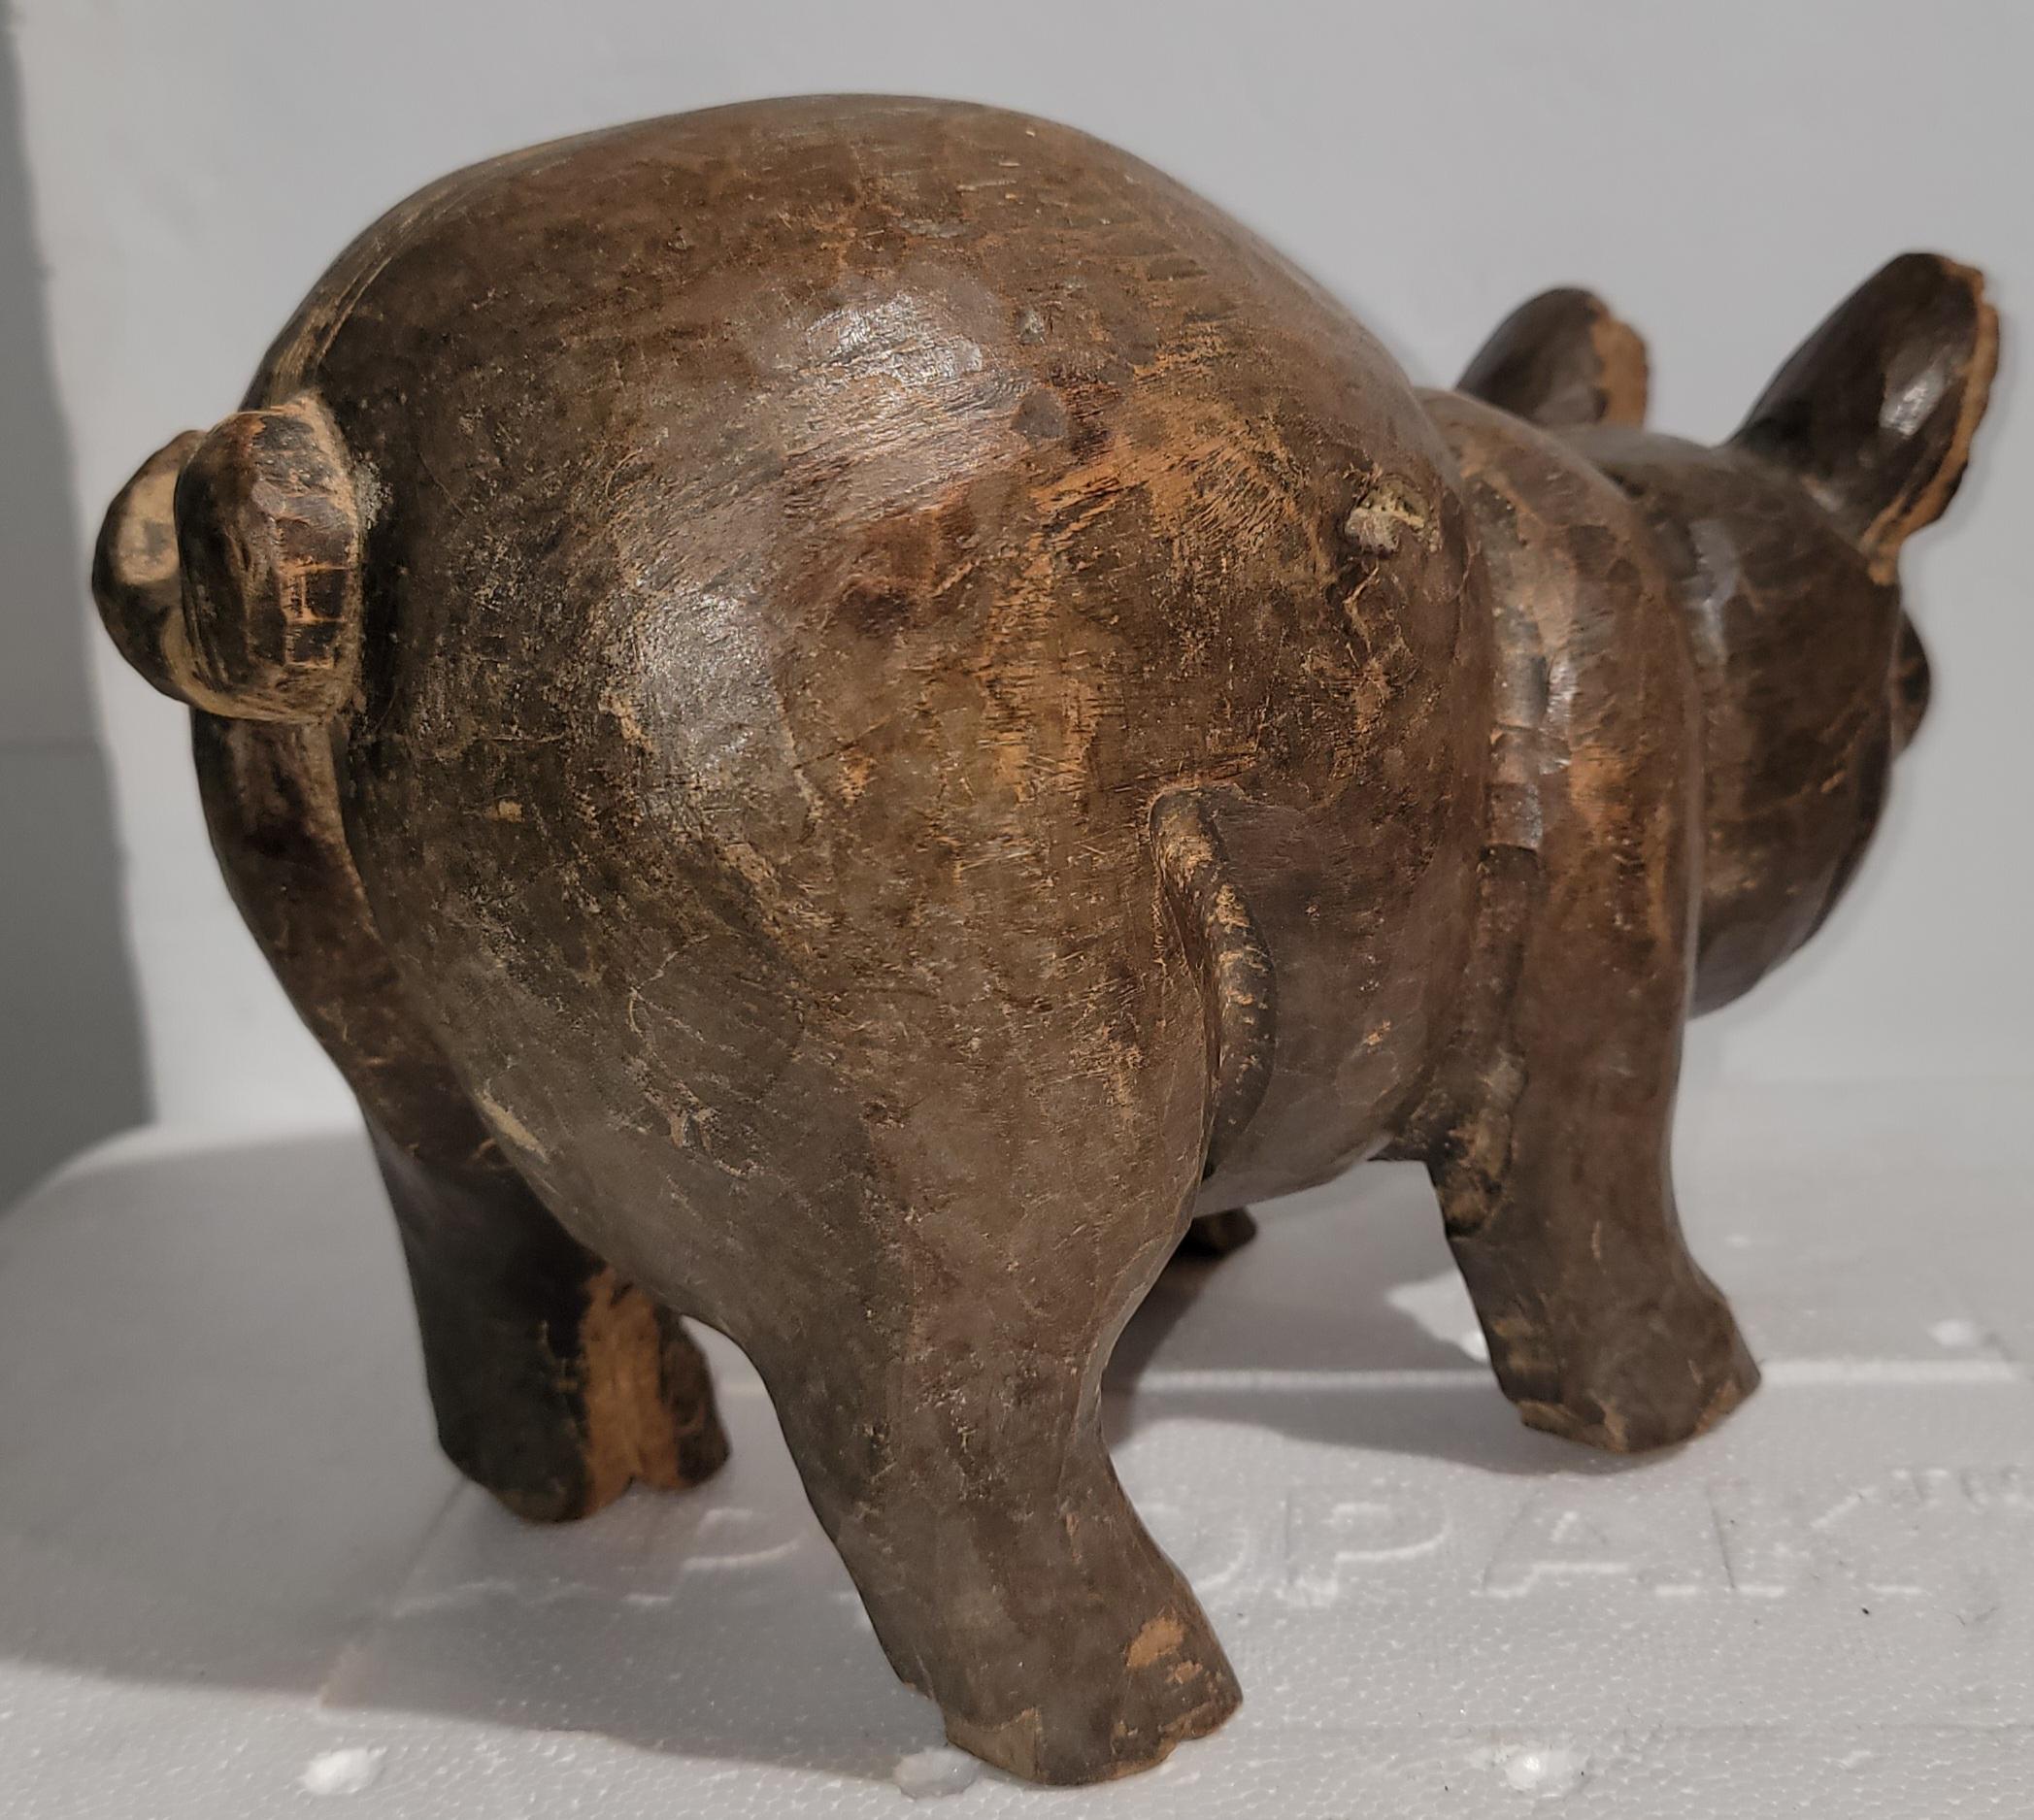 Early 20thc hand carved pig or hog with amazing patina. This is most unusual and found in the mid west.